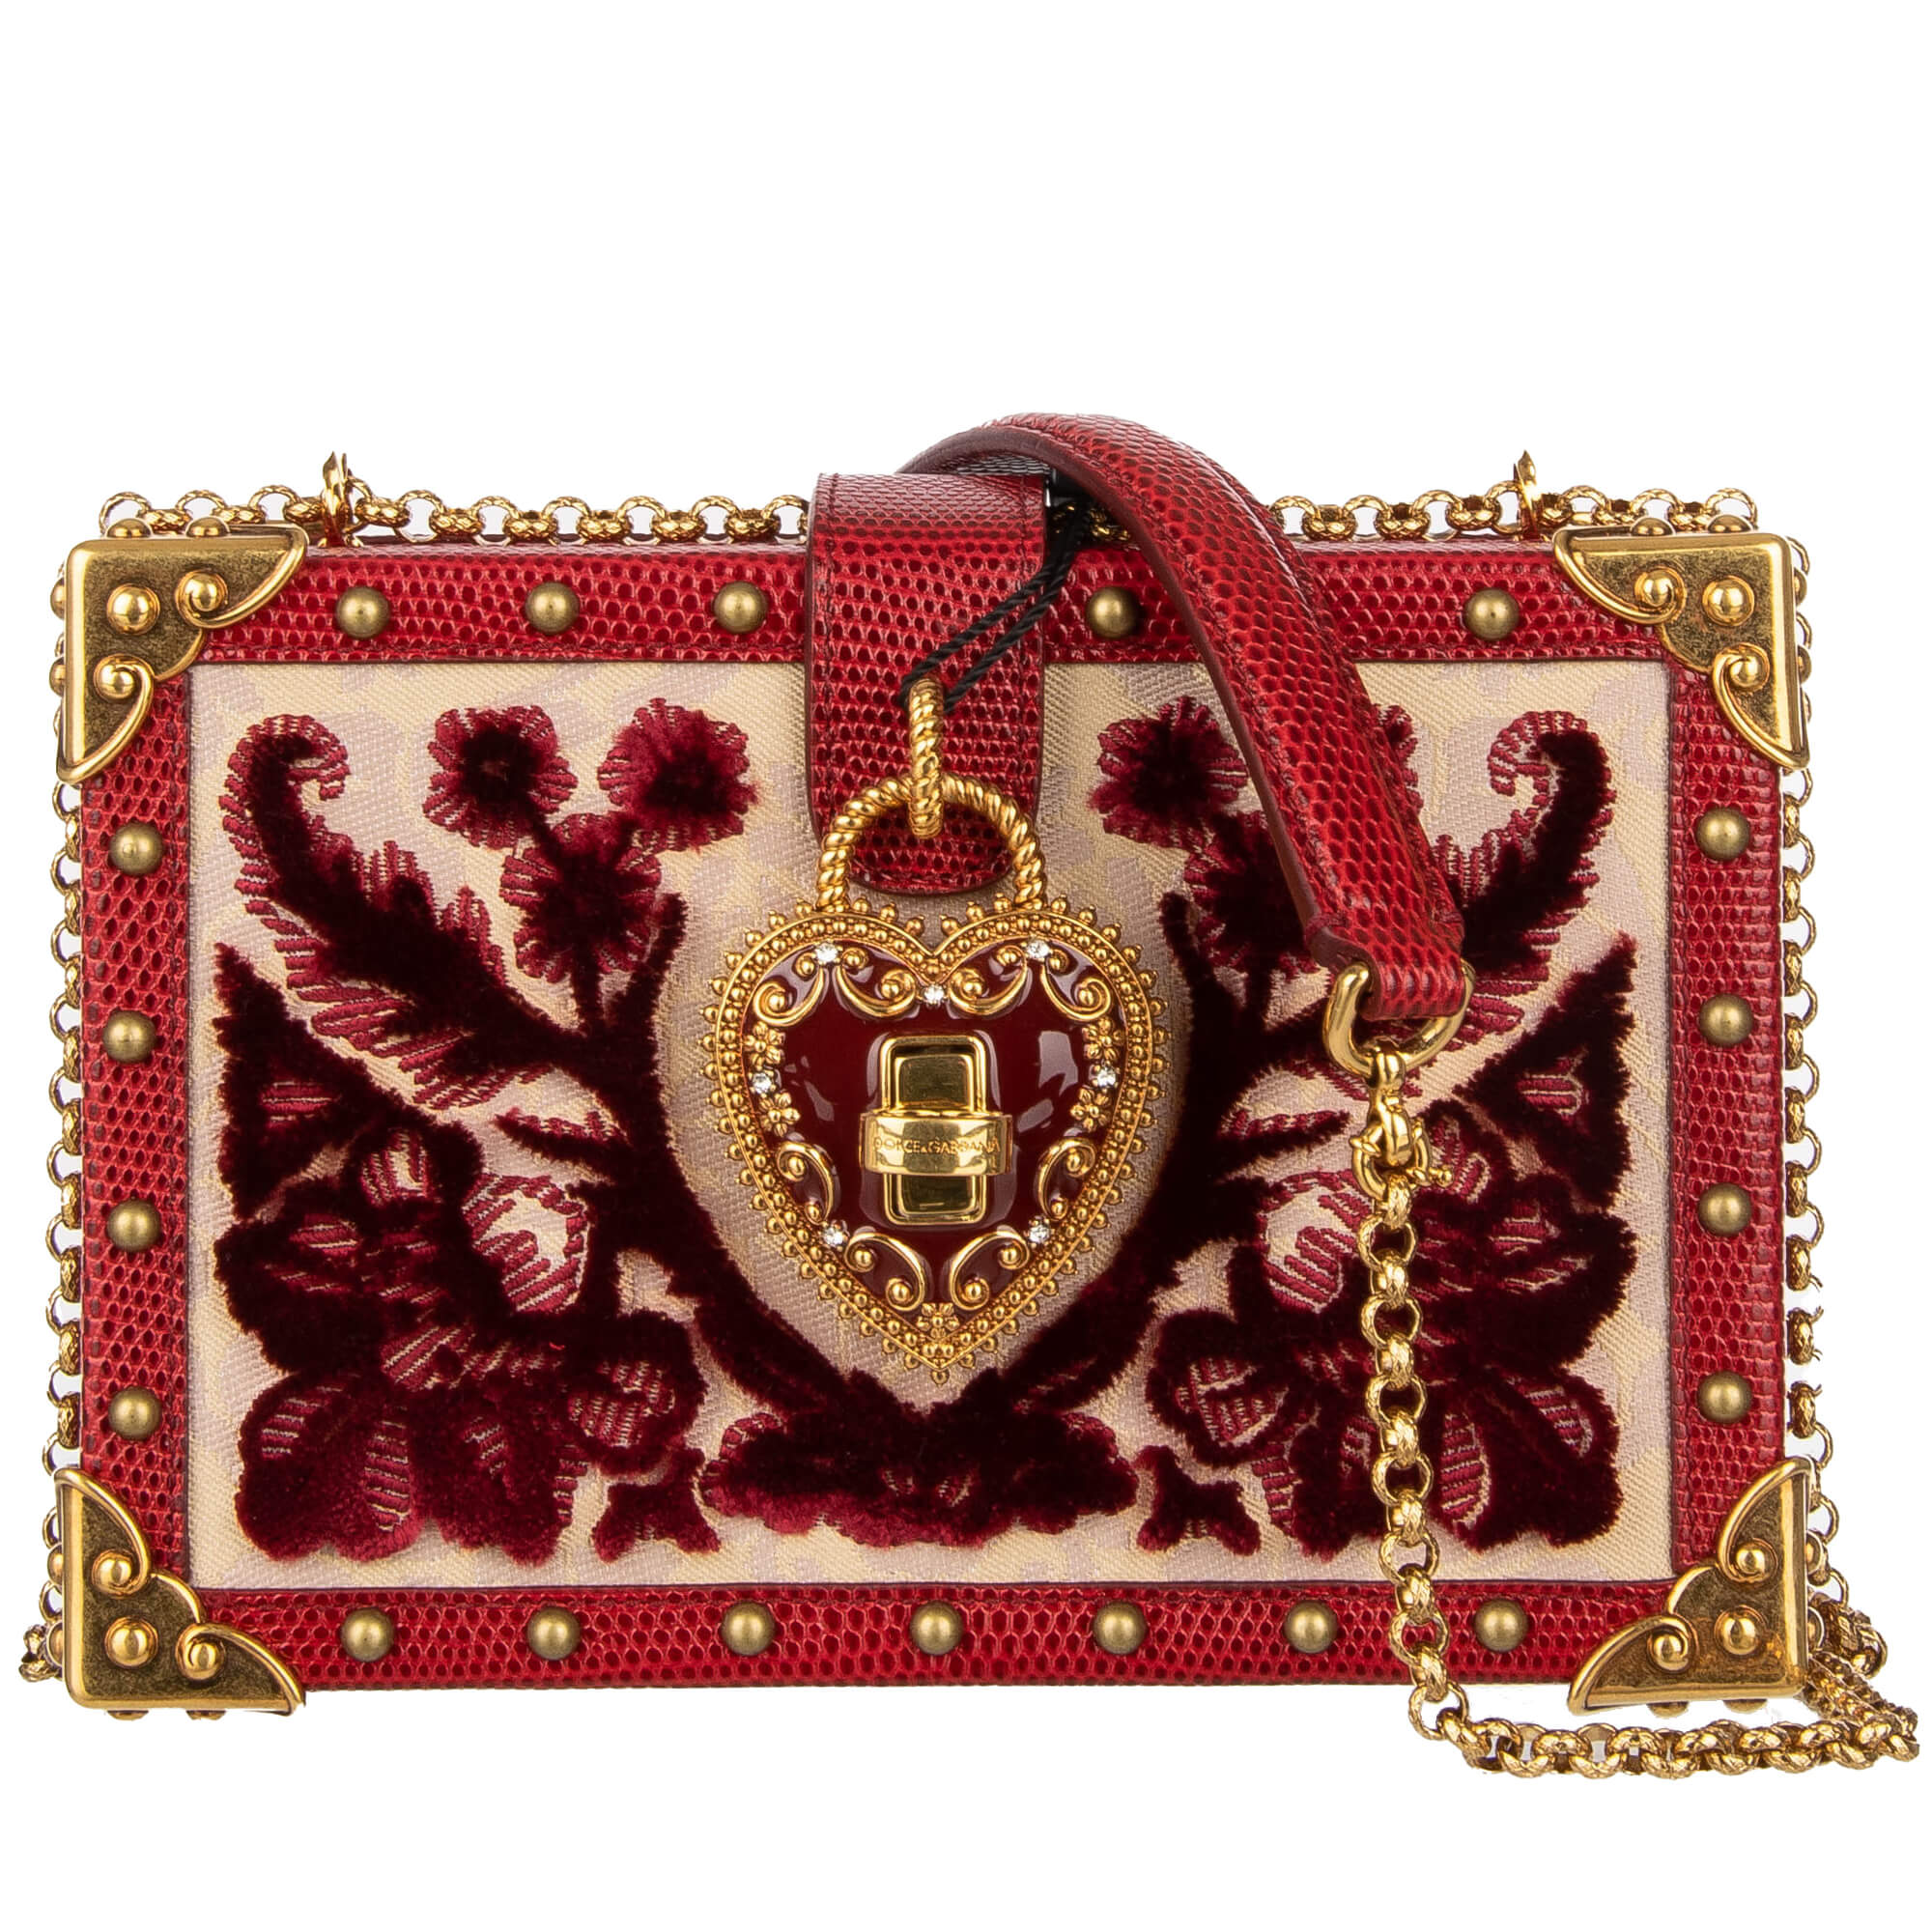 Dolce & Gabbana Velvet Brocade Leather Clutch Box Bag MY HEART with Studs  Red | FASHION ROOMS